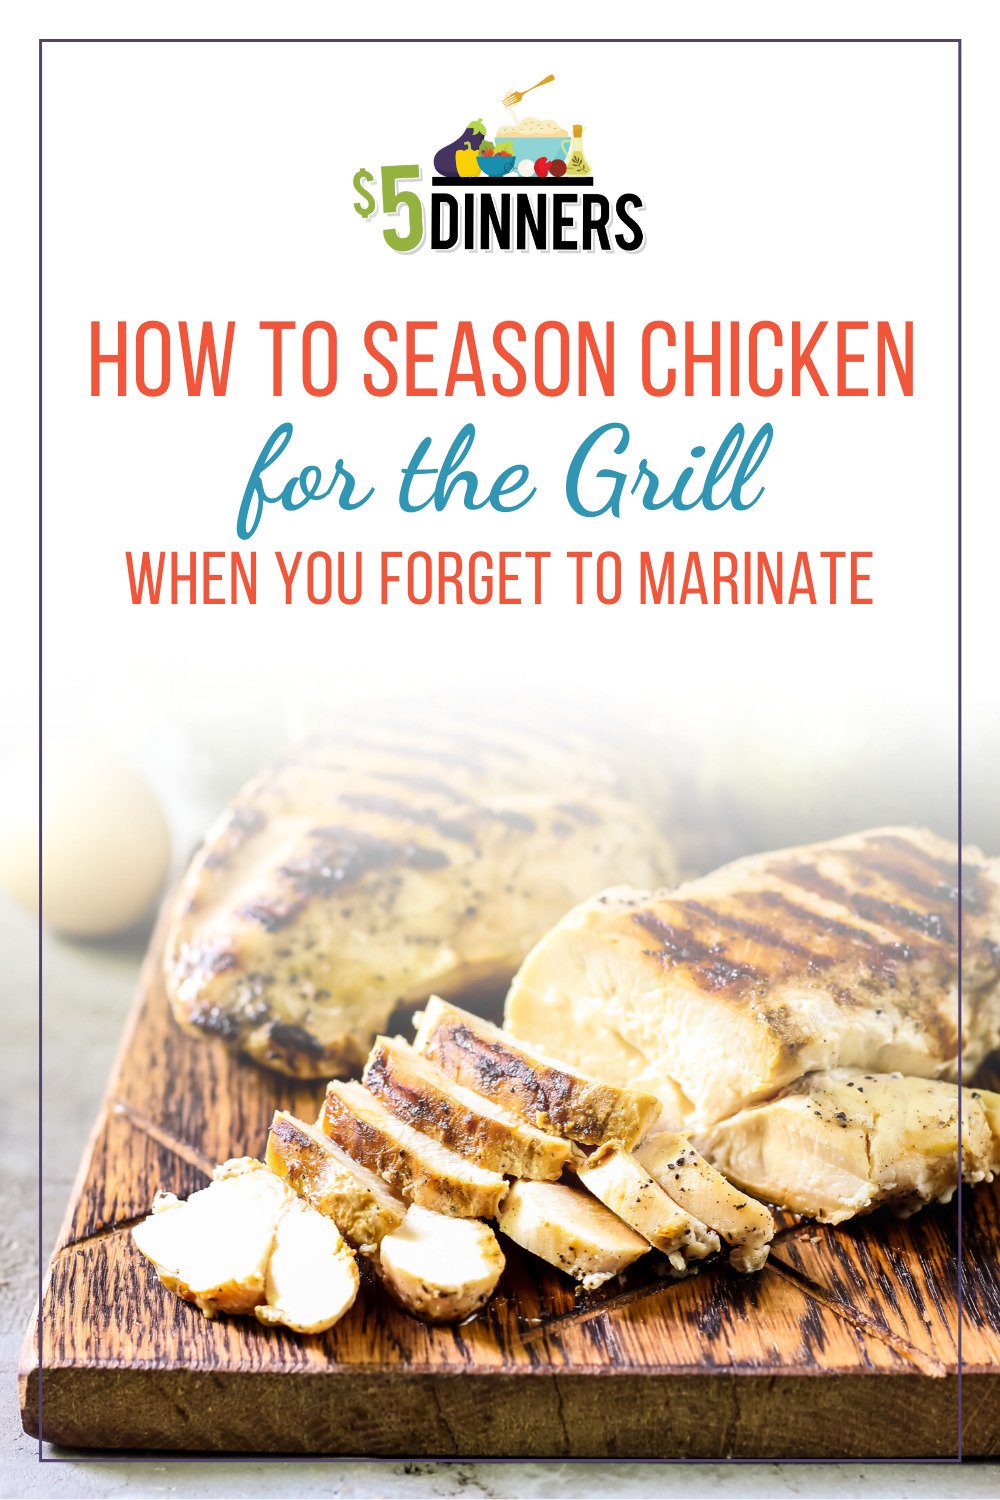 how to season chicken for the grill when you forget to marinate it